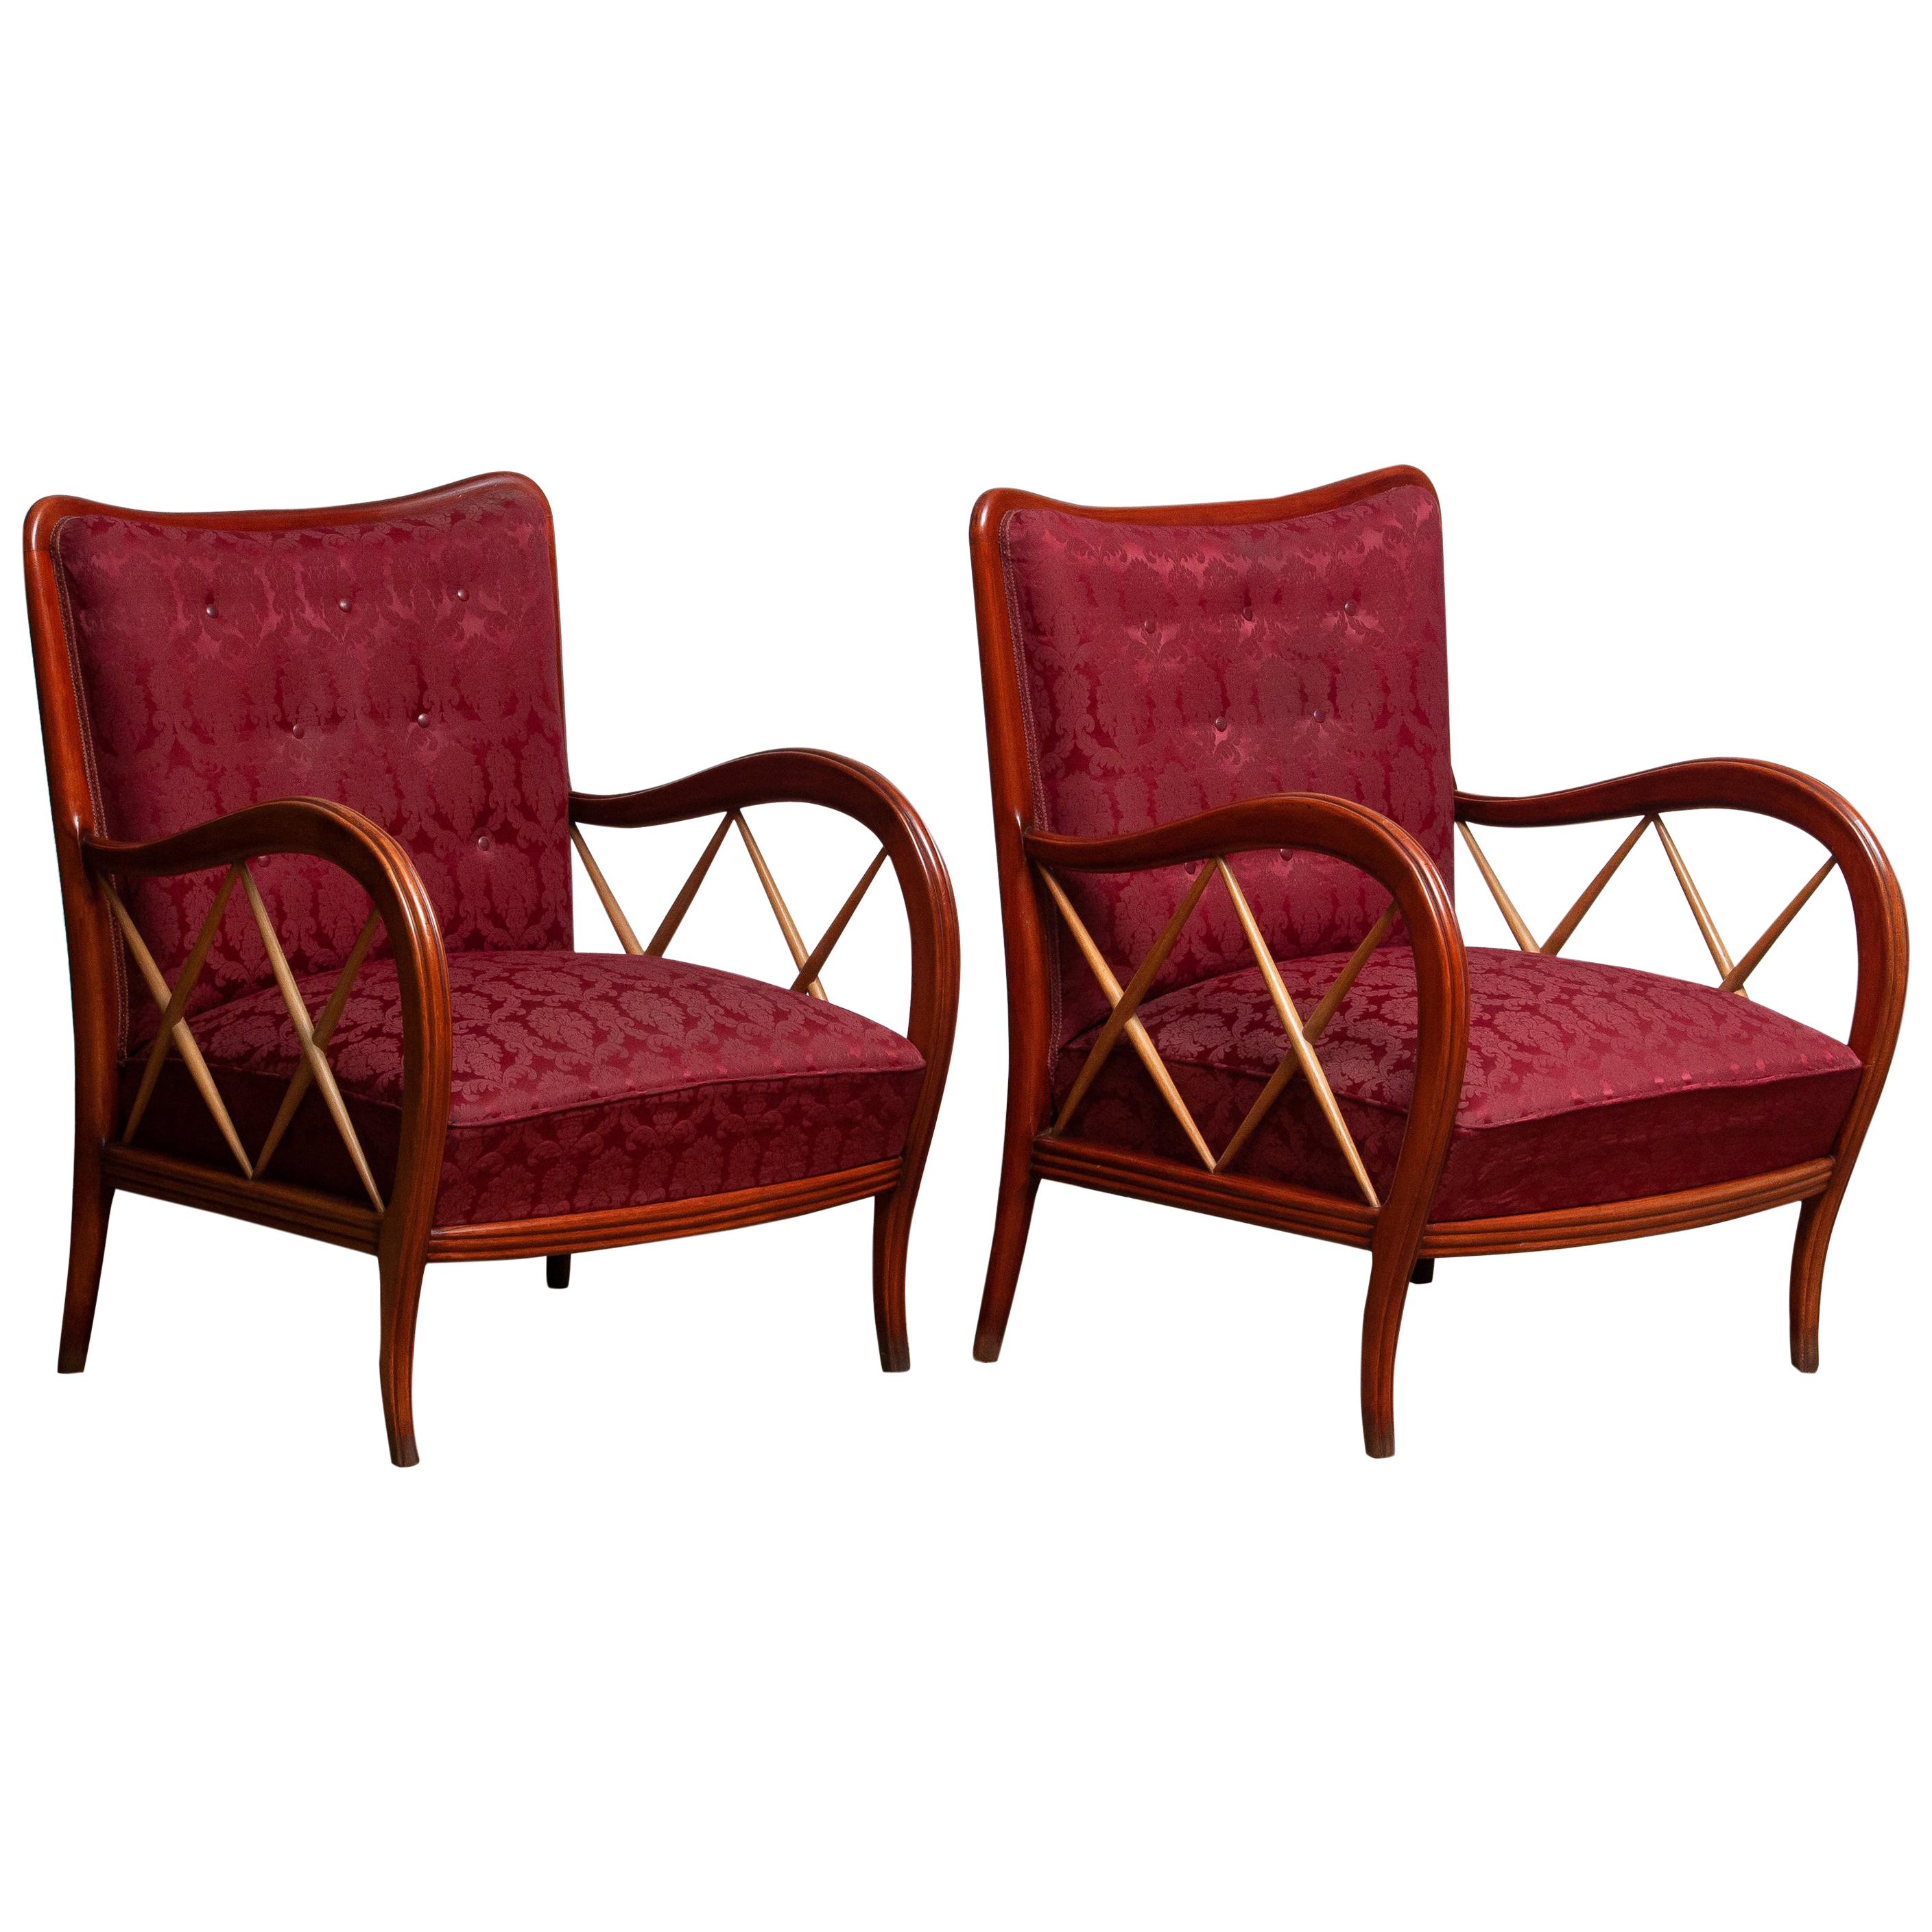 Set of two Italian lounge / easy chairs by Paolo Buffa from the 1940s.
The condition is original and still good.
 
 